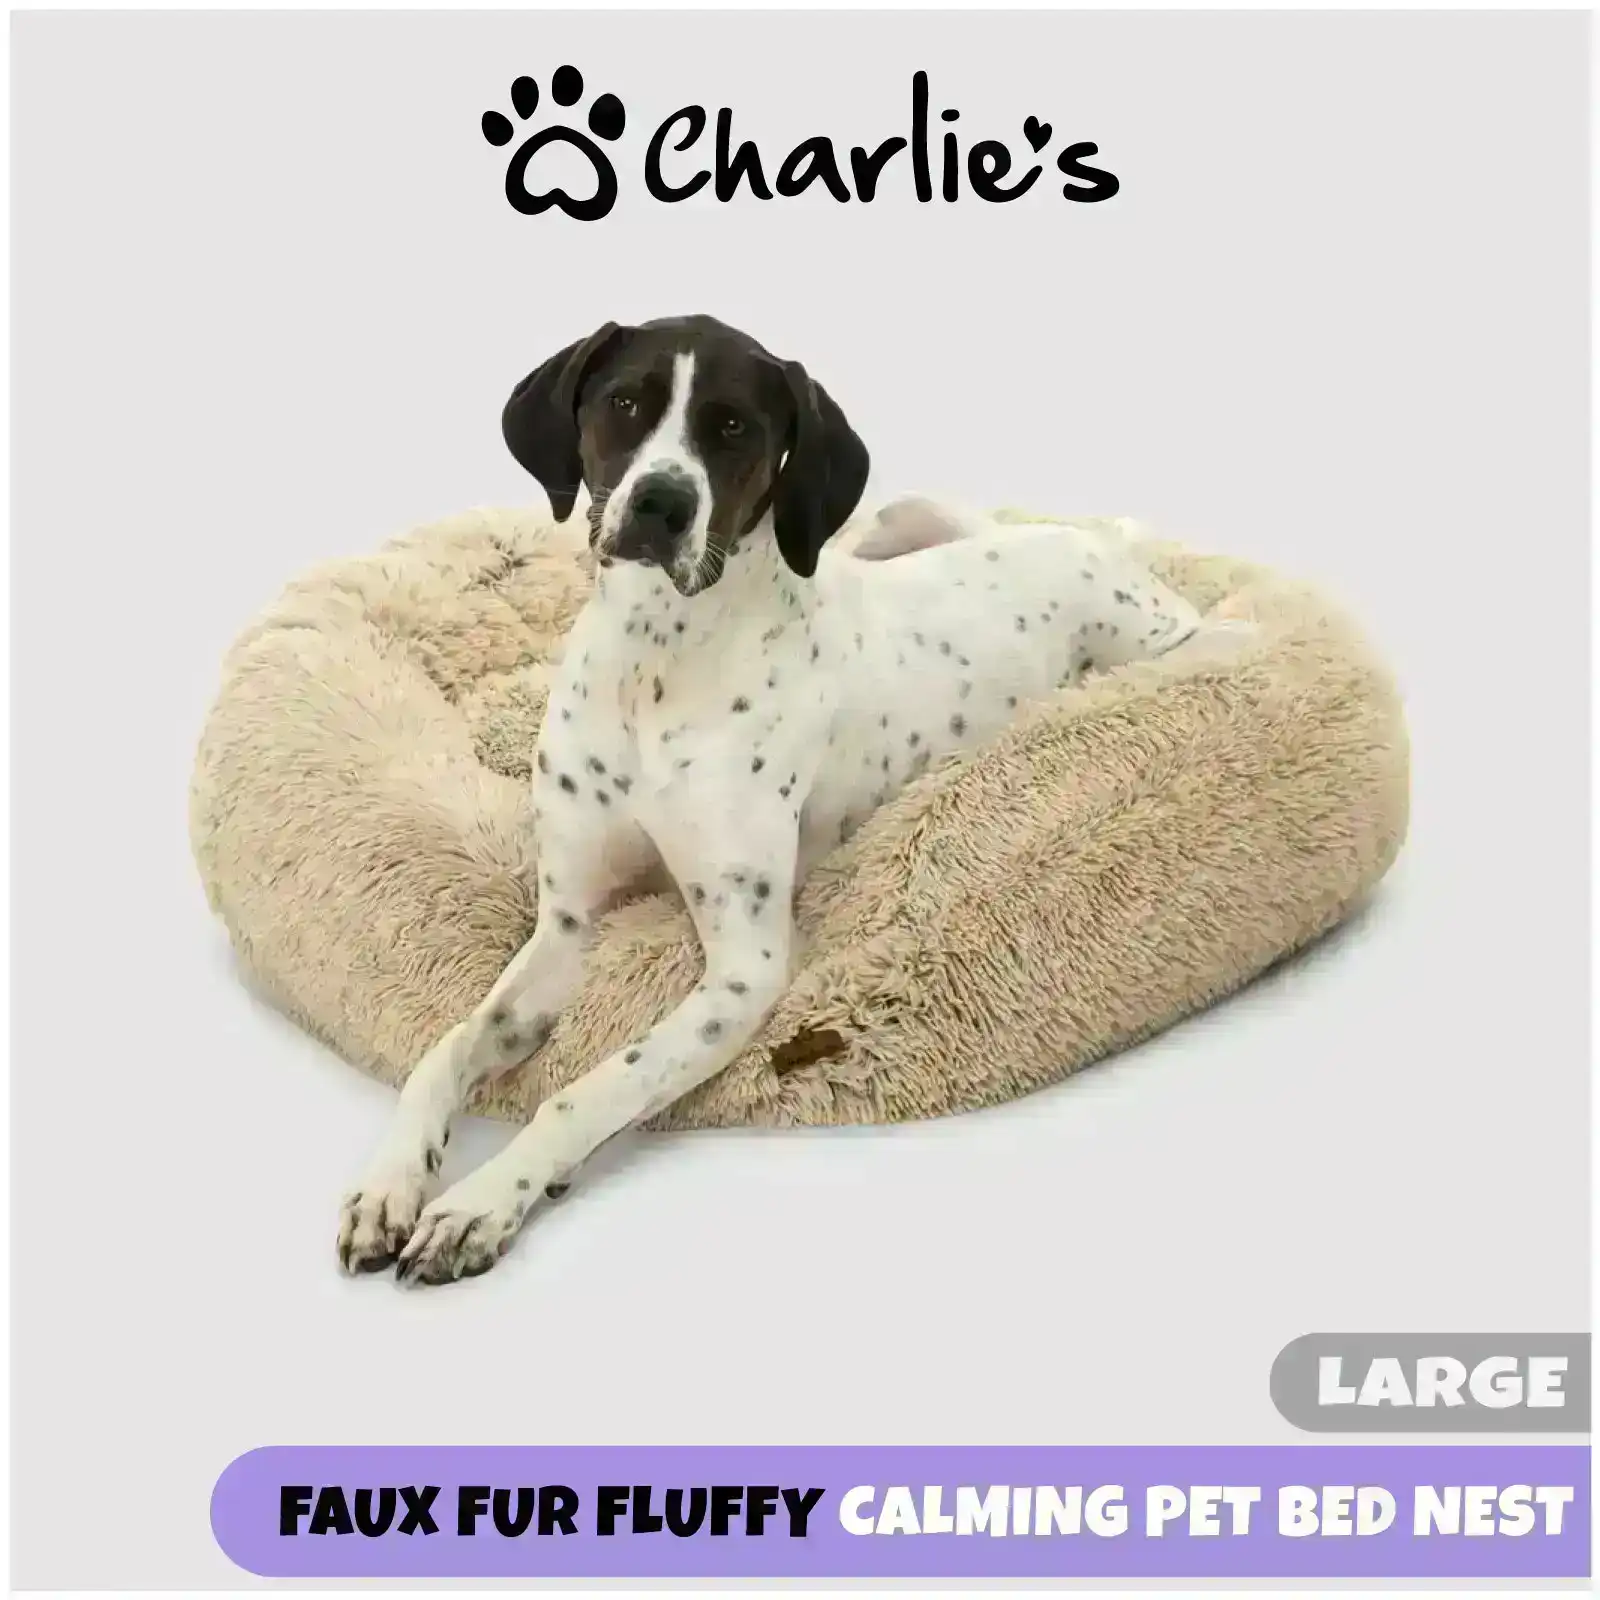 Charlie's Shaggy Faux Fur Donut Calming Pet Nest Bed Cream Chinchilla Large